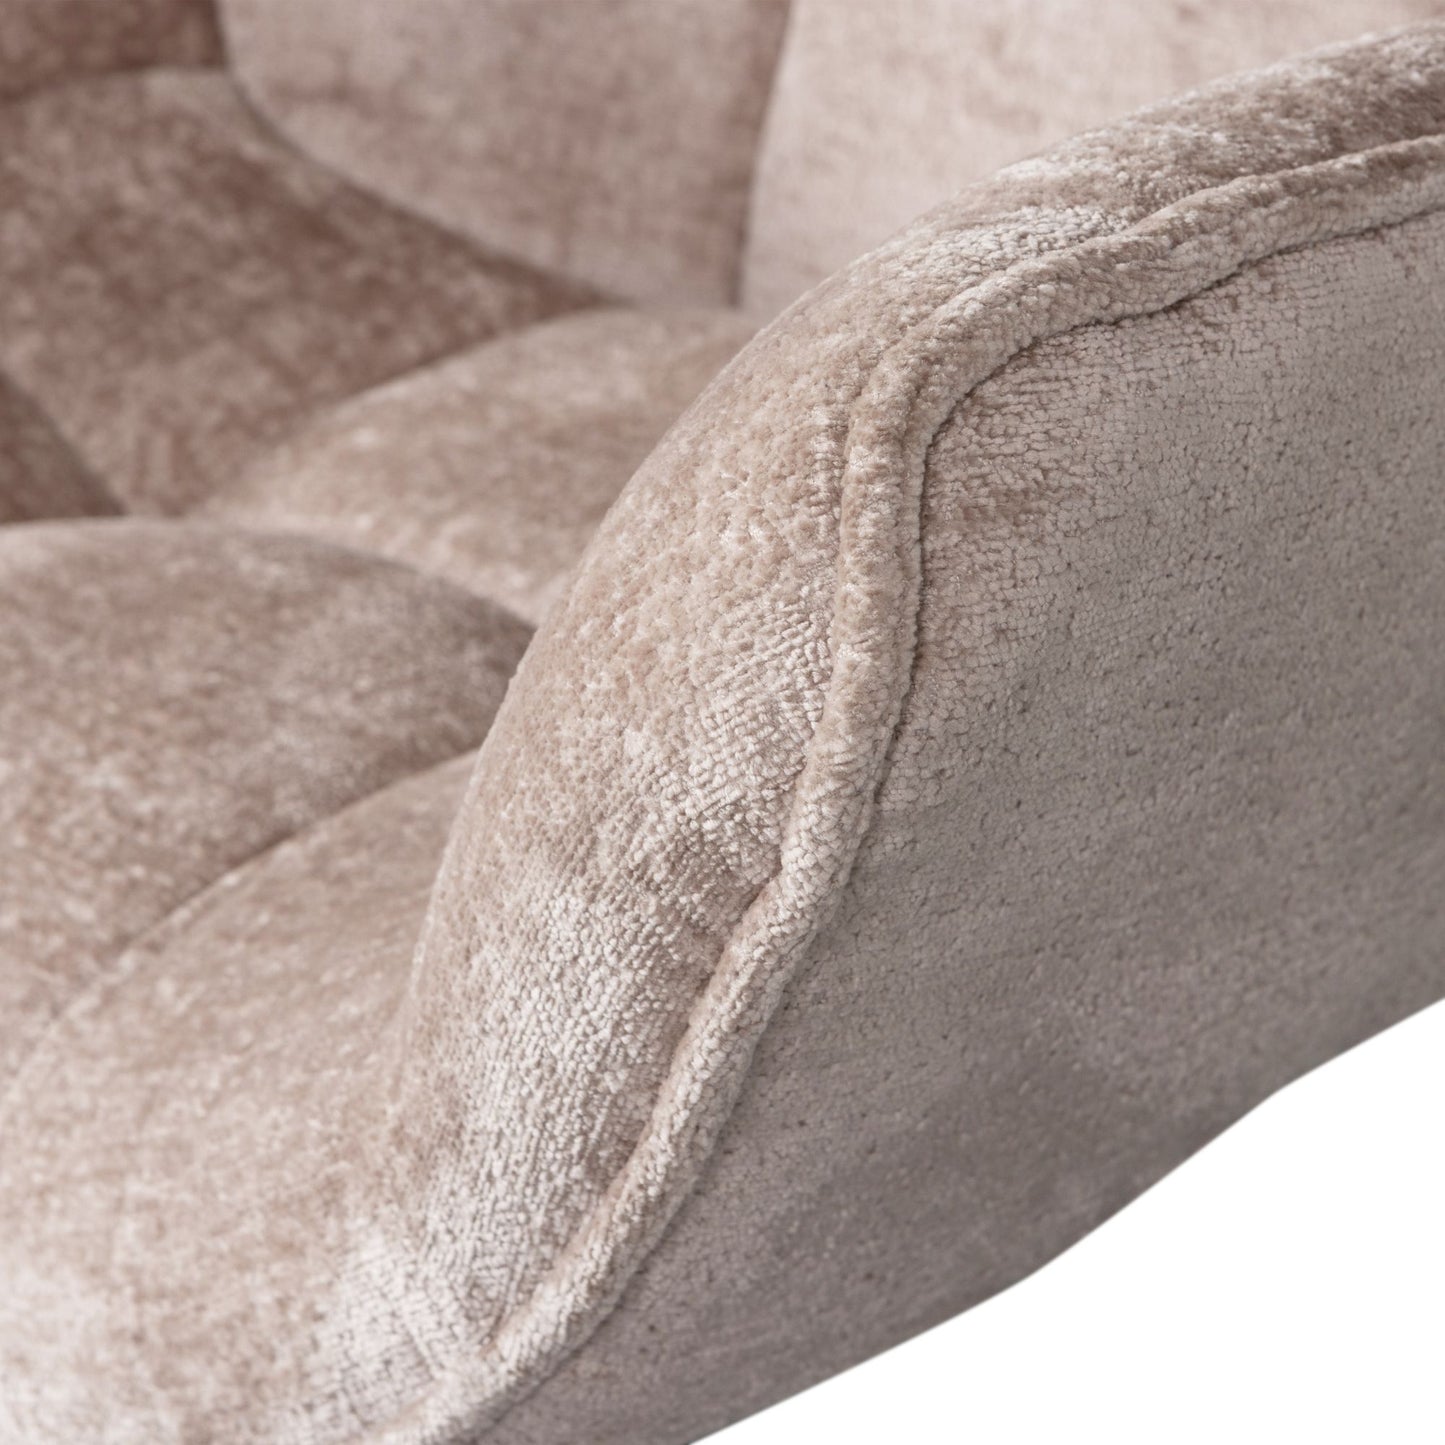 Woood Wibo fauteuil taupe